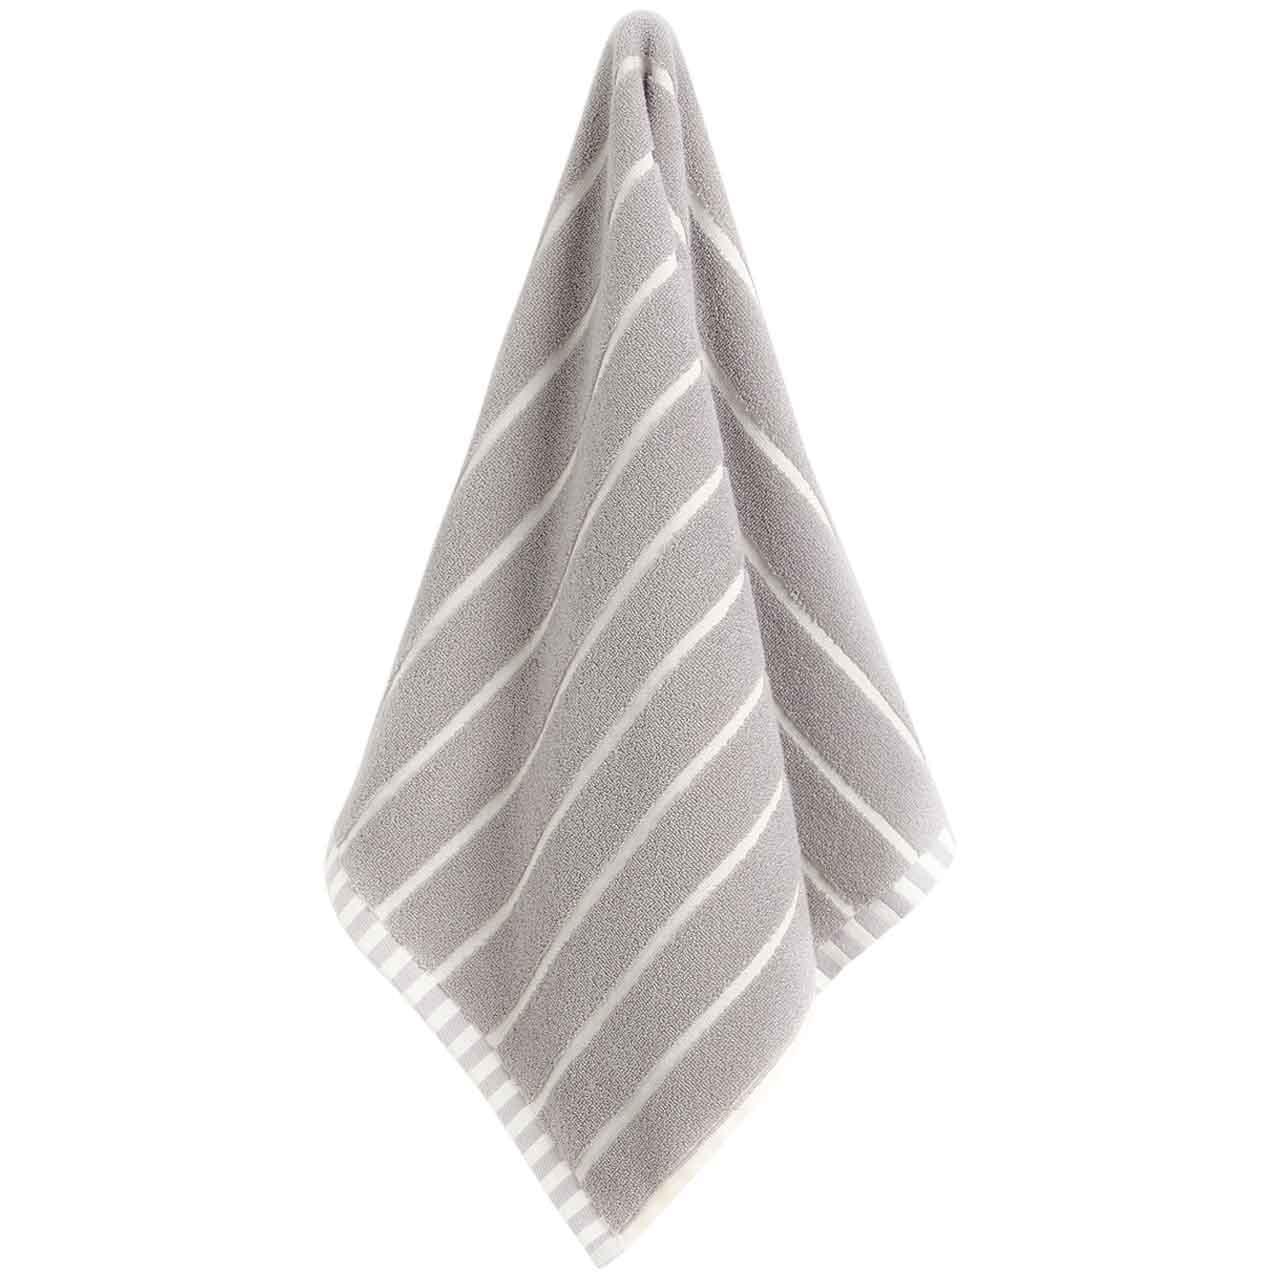 M&S Pure Cotton Carved Stripe Hand Towel, Light Grey